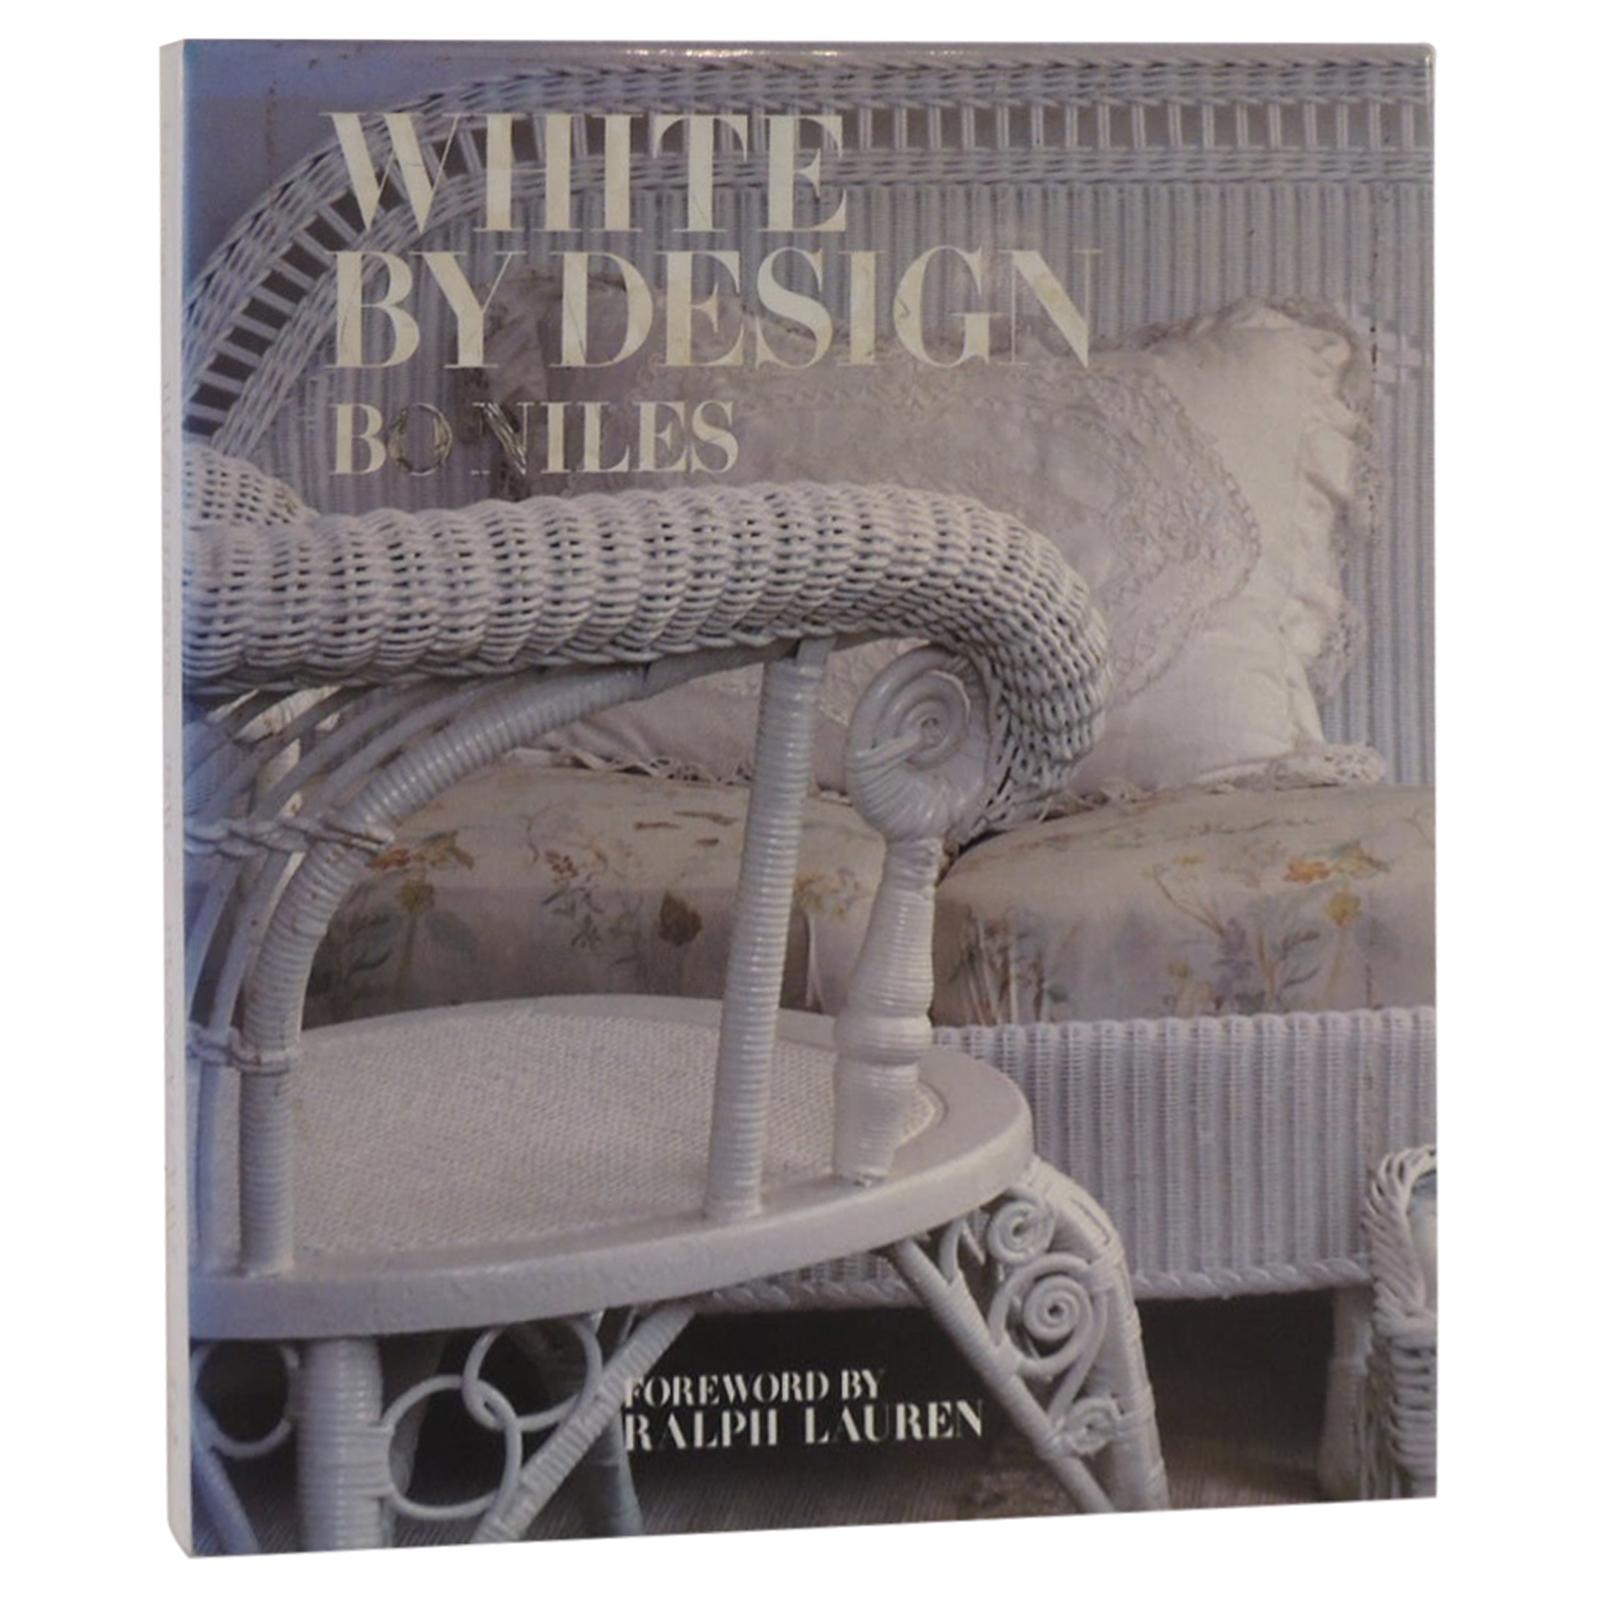 White By Design Hardcover Decorative Book by Bo Niles